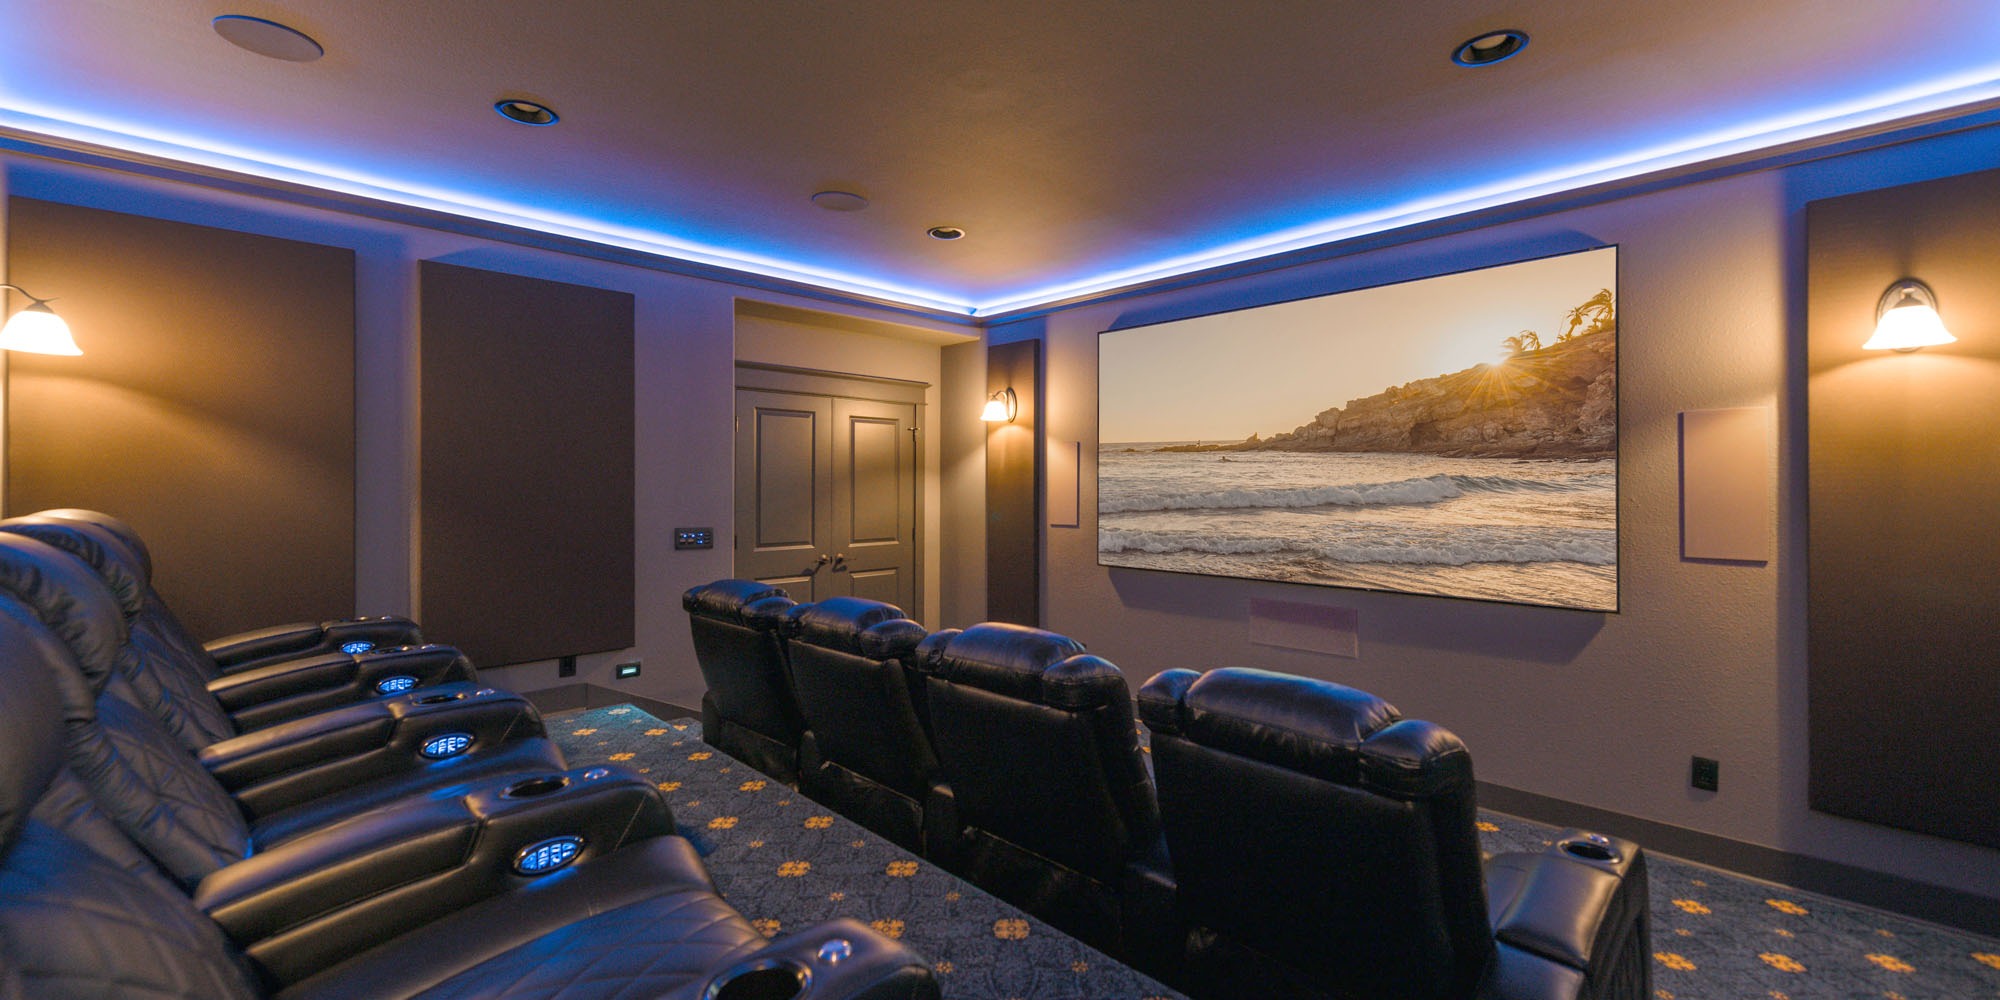 Home Theater in Bend, Oregon